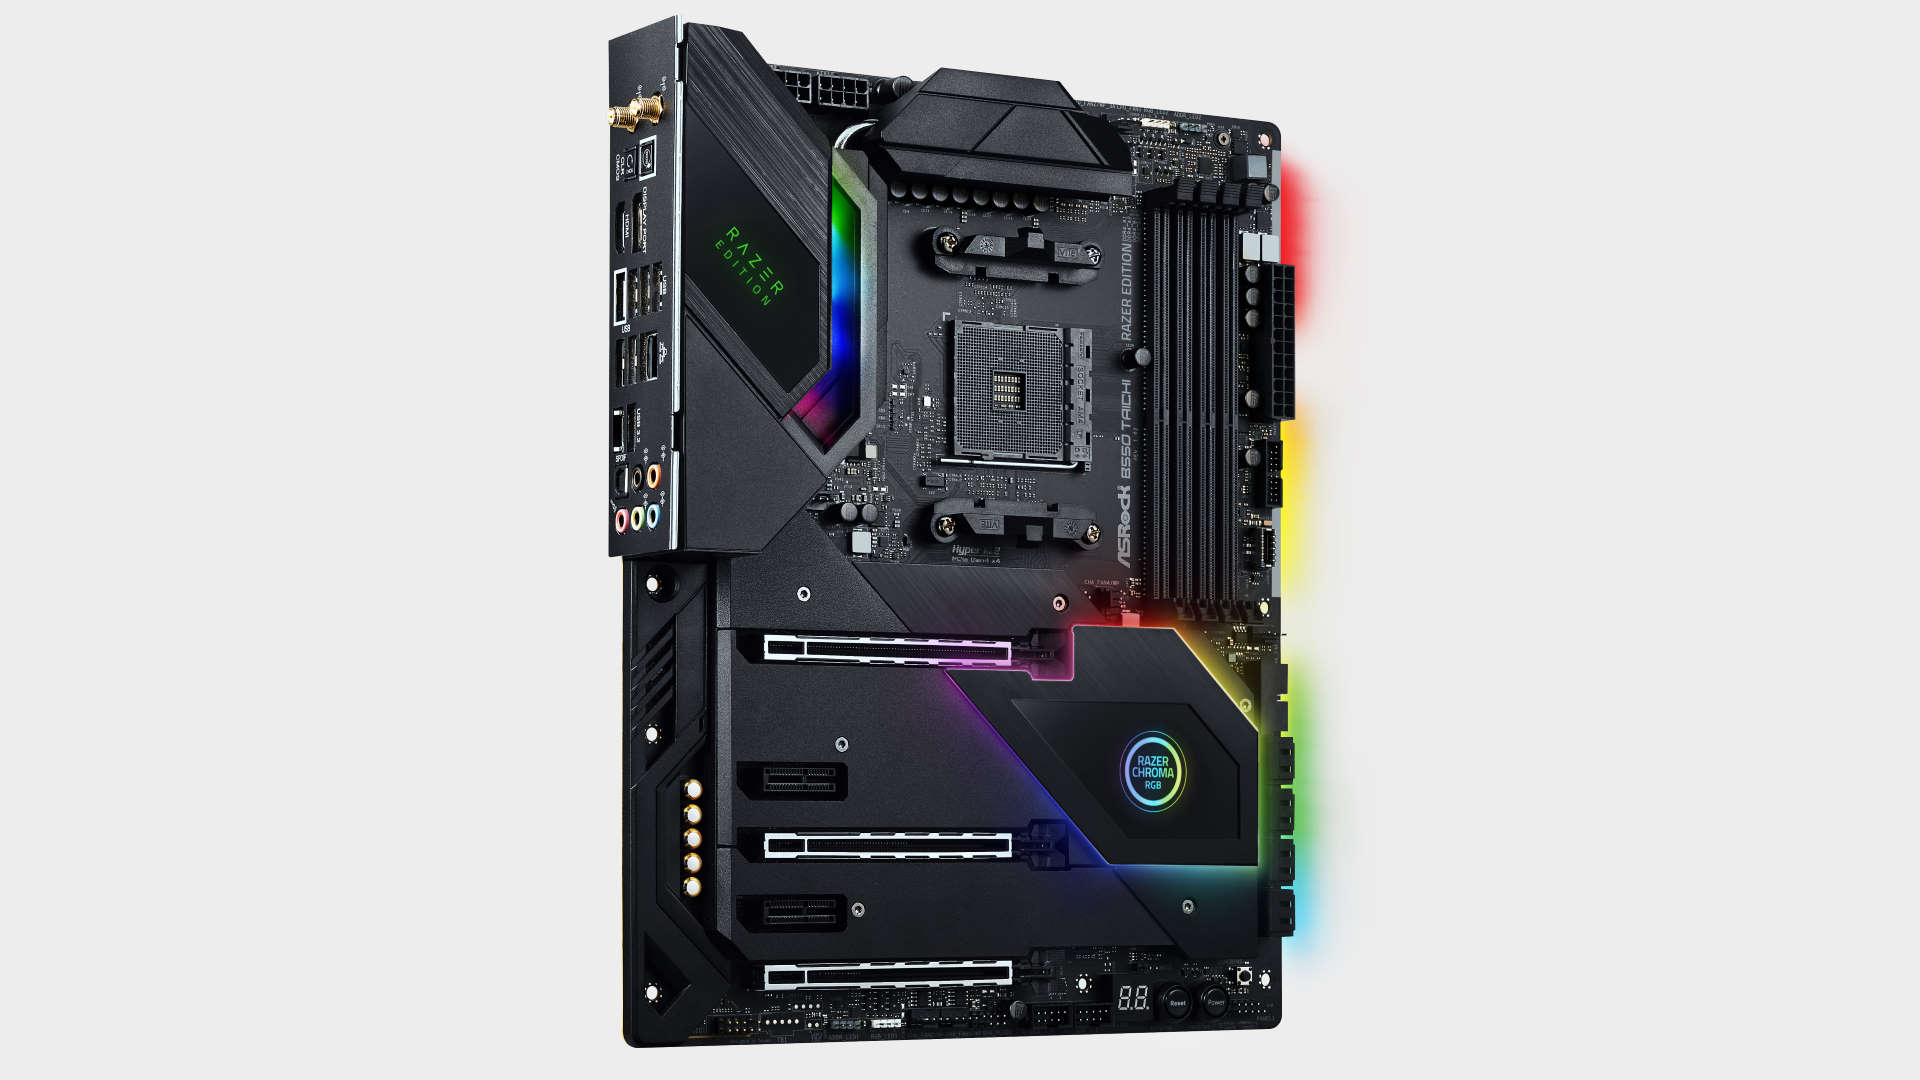 ASRock B550 Taichi Razer Edition motherboard pictured on a grey background